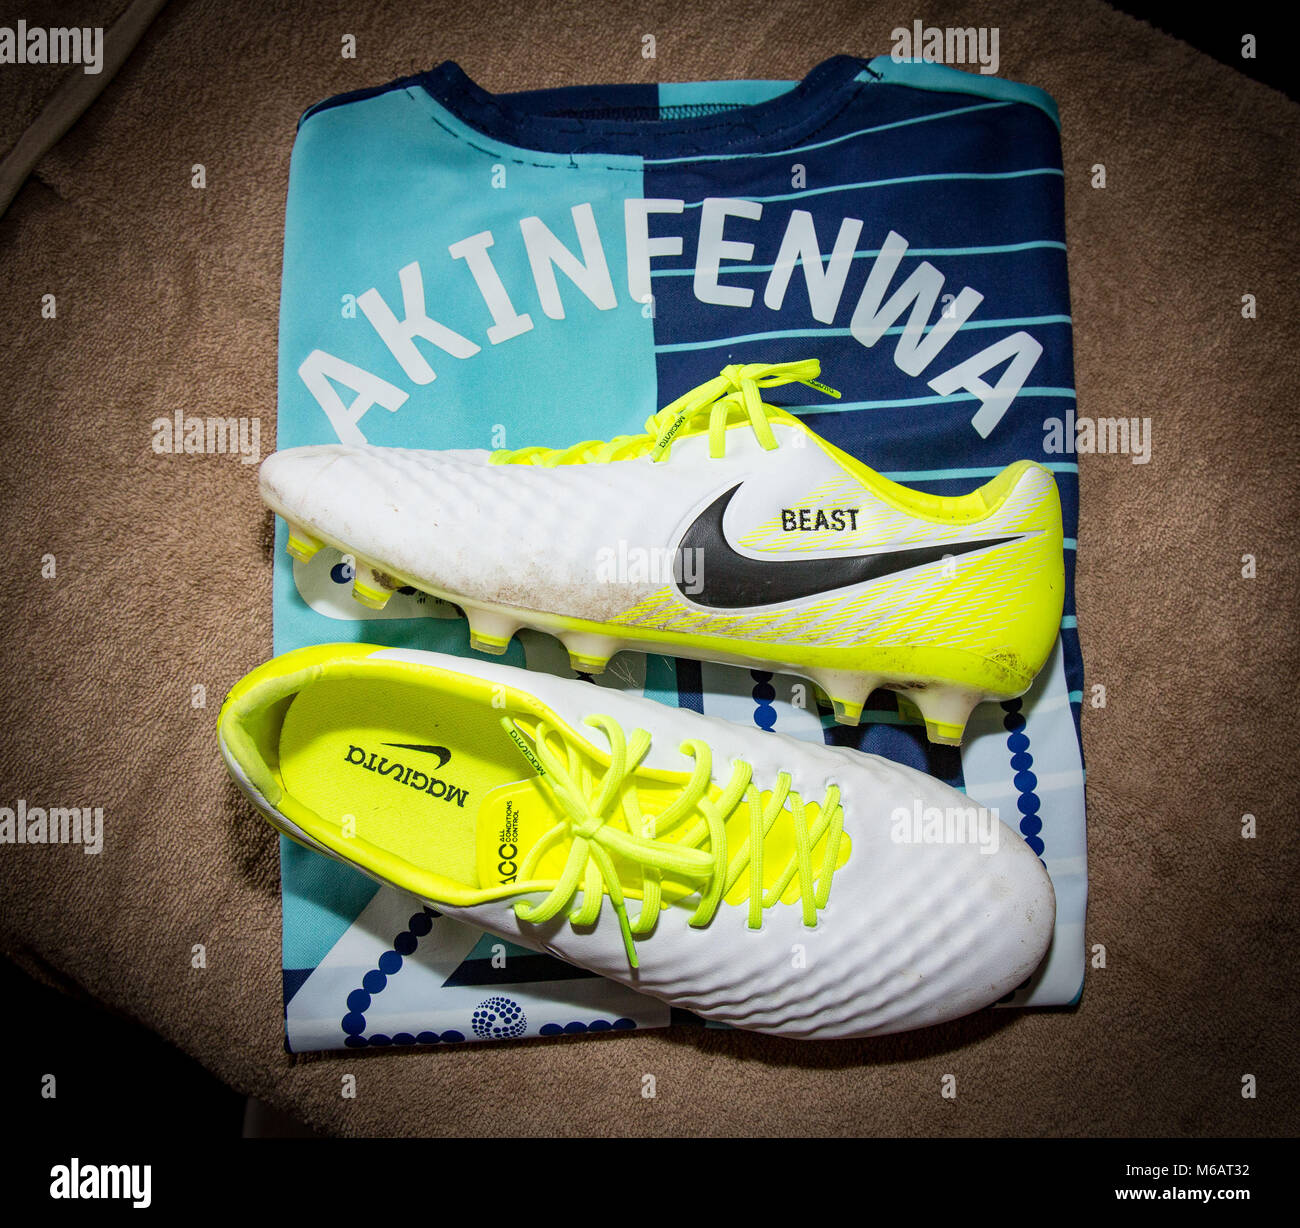 nike personalized football boots